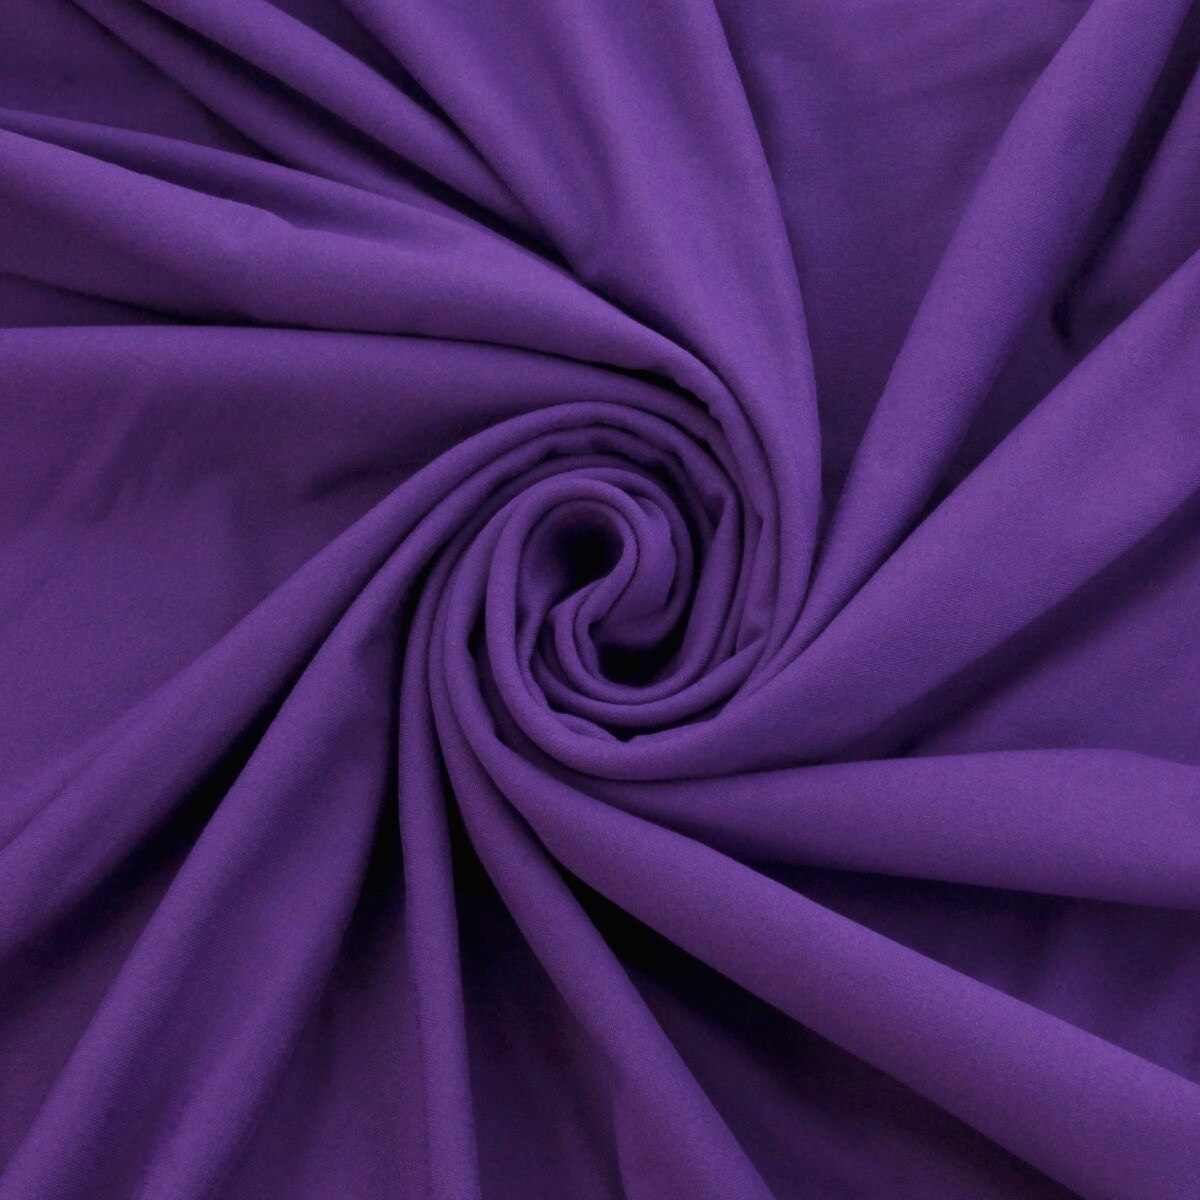 Solid DBP Fabric - Double Brushed Polyester - Purple - 1/2yd | Michaels